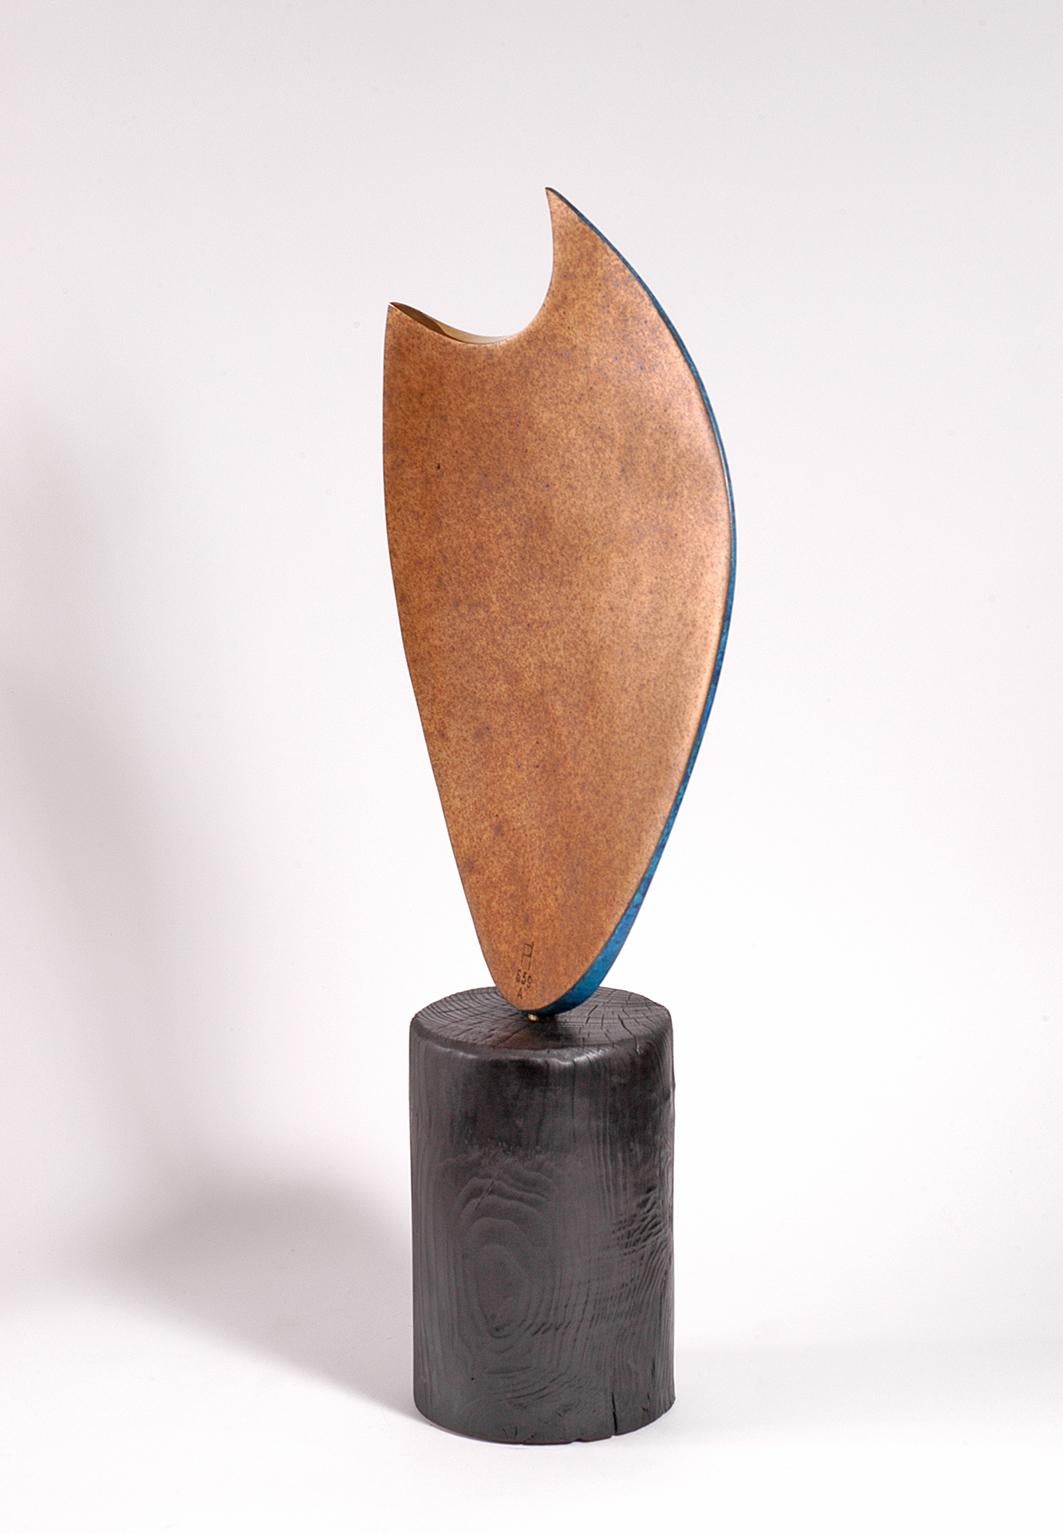 Bronze on a scorched yew base
Series of variations
Stamped with monogram signature and uniquely numbered 659A
The crescent at the top shows natural bronze in a polished finish.
Weight: 5.7 kg

About Philip Hearsey

With a background in architecture,